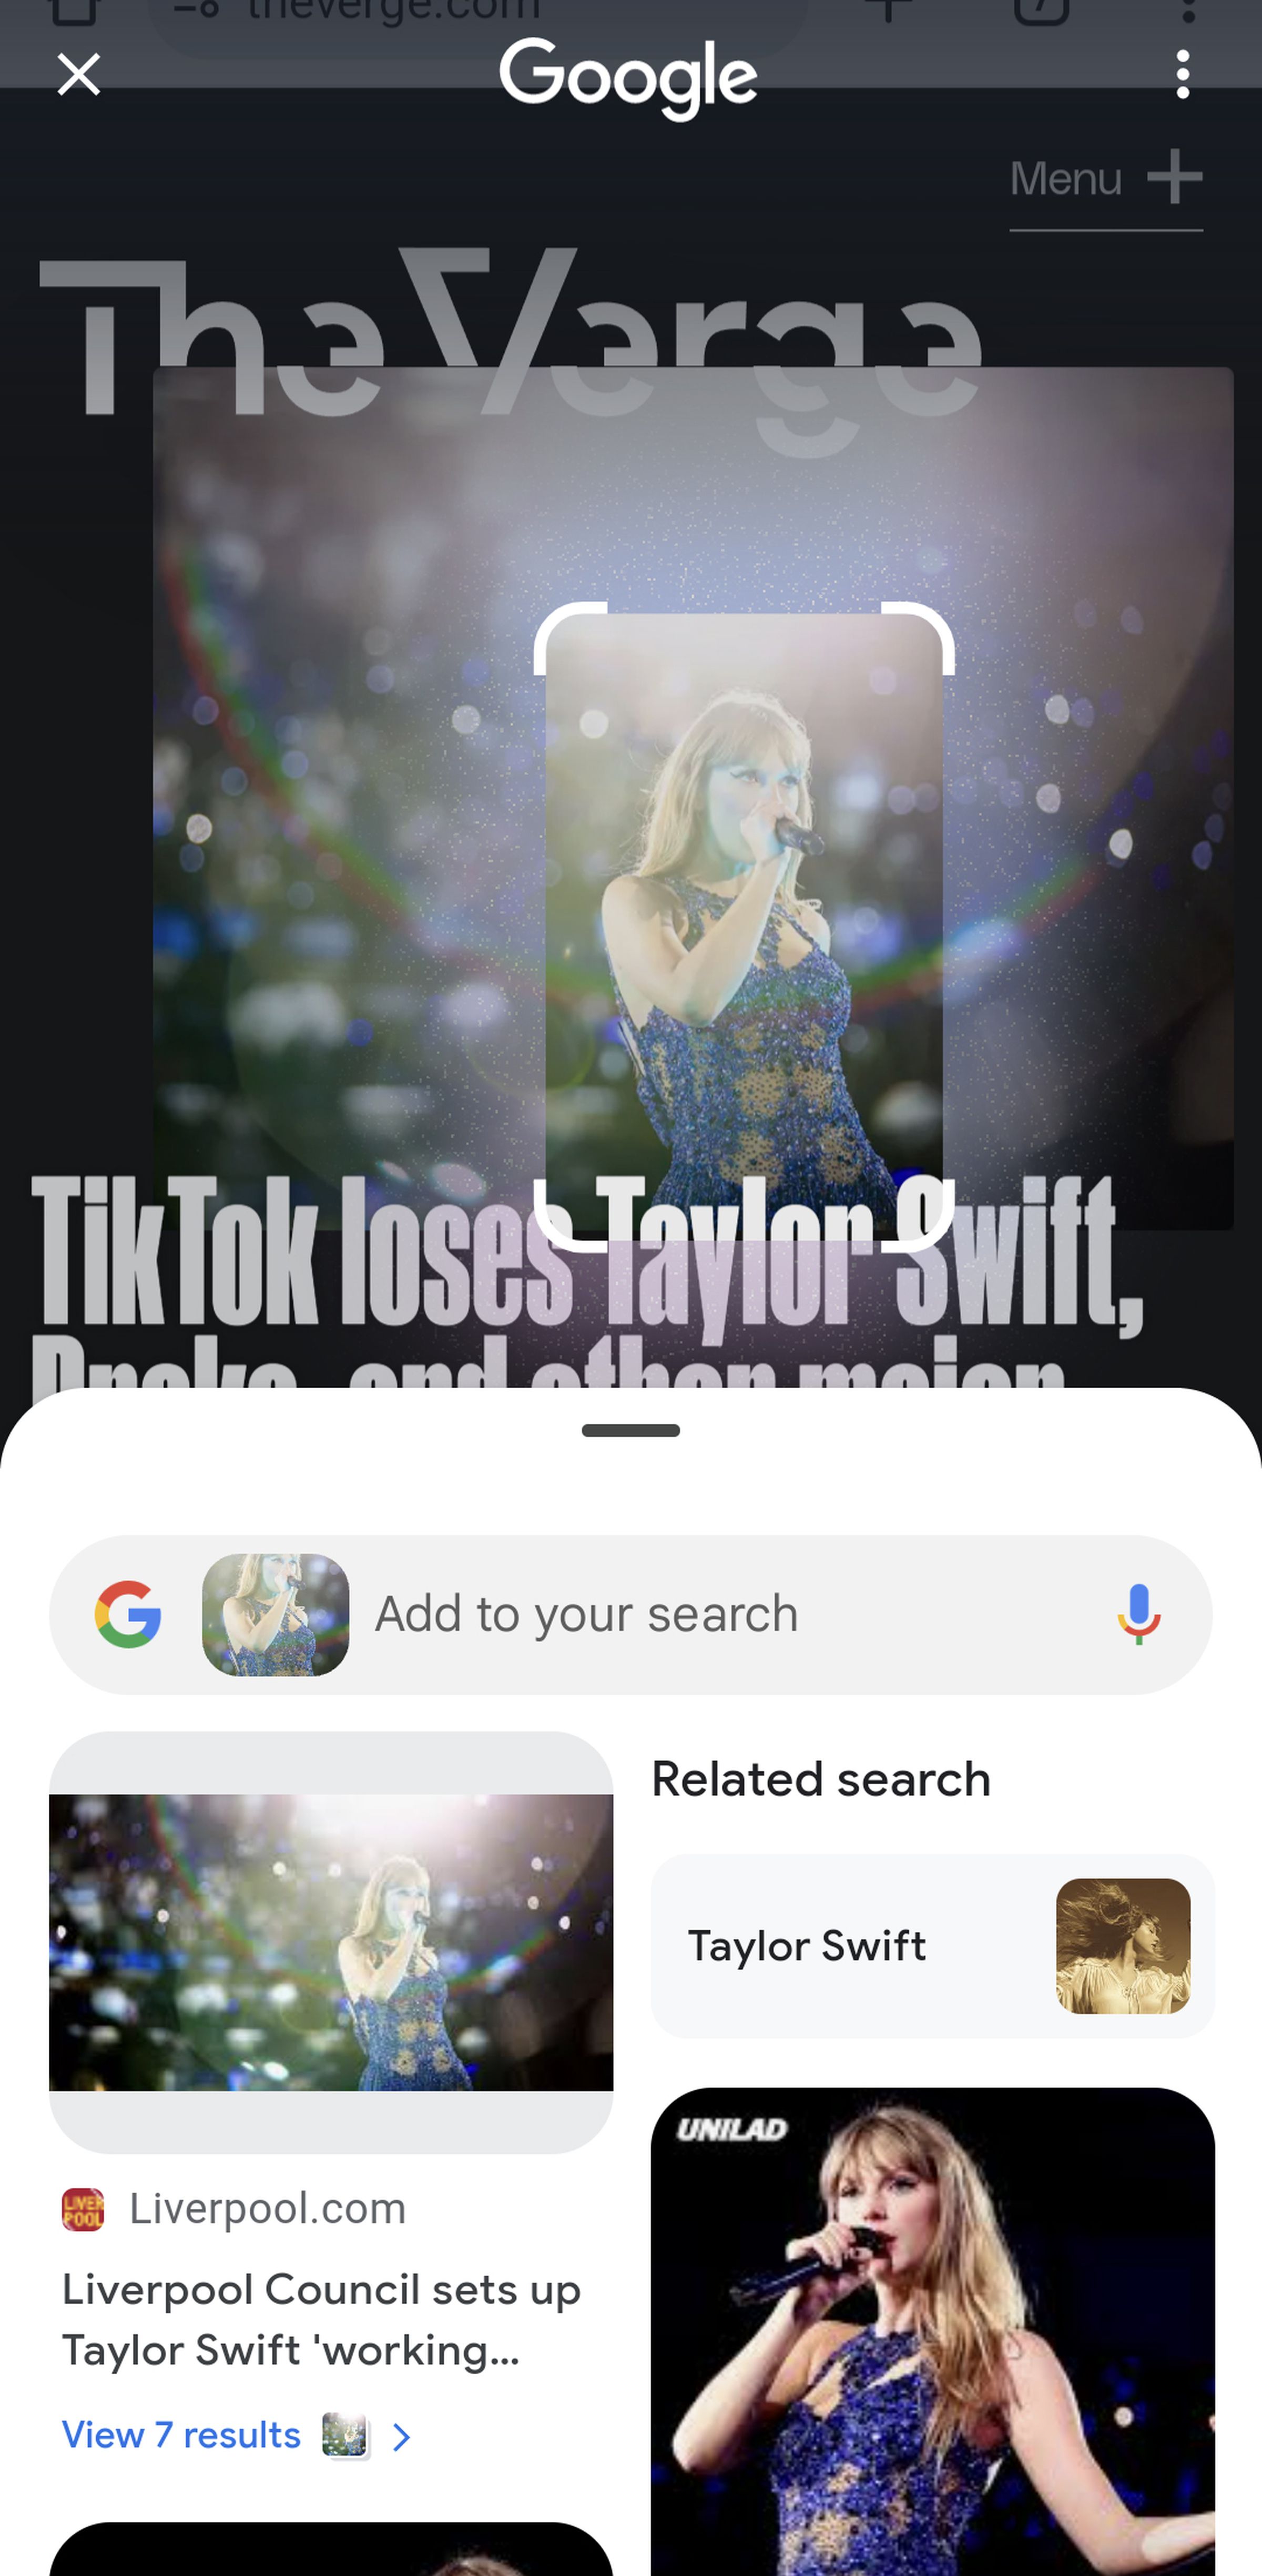 Mobile screen with image of Taylor Swift from The verge, with search results at the bottom.